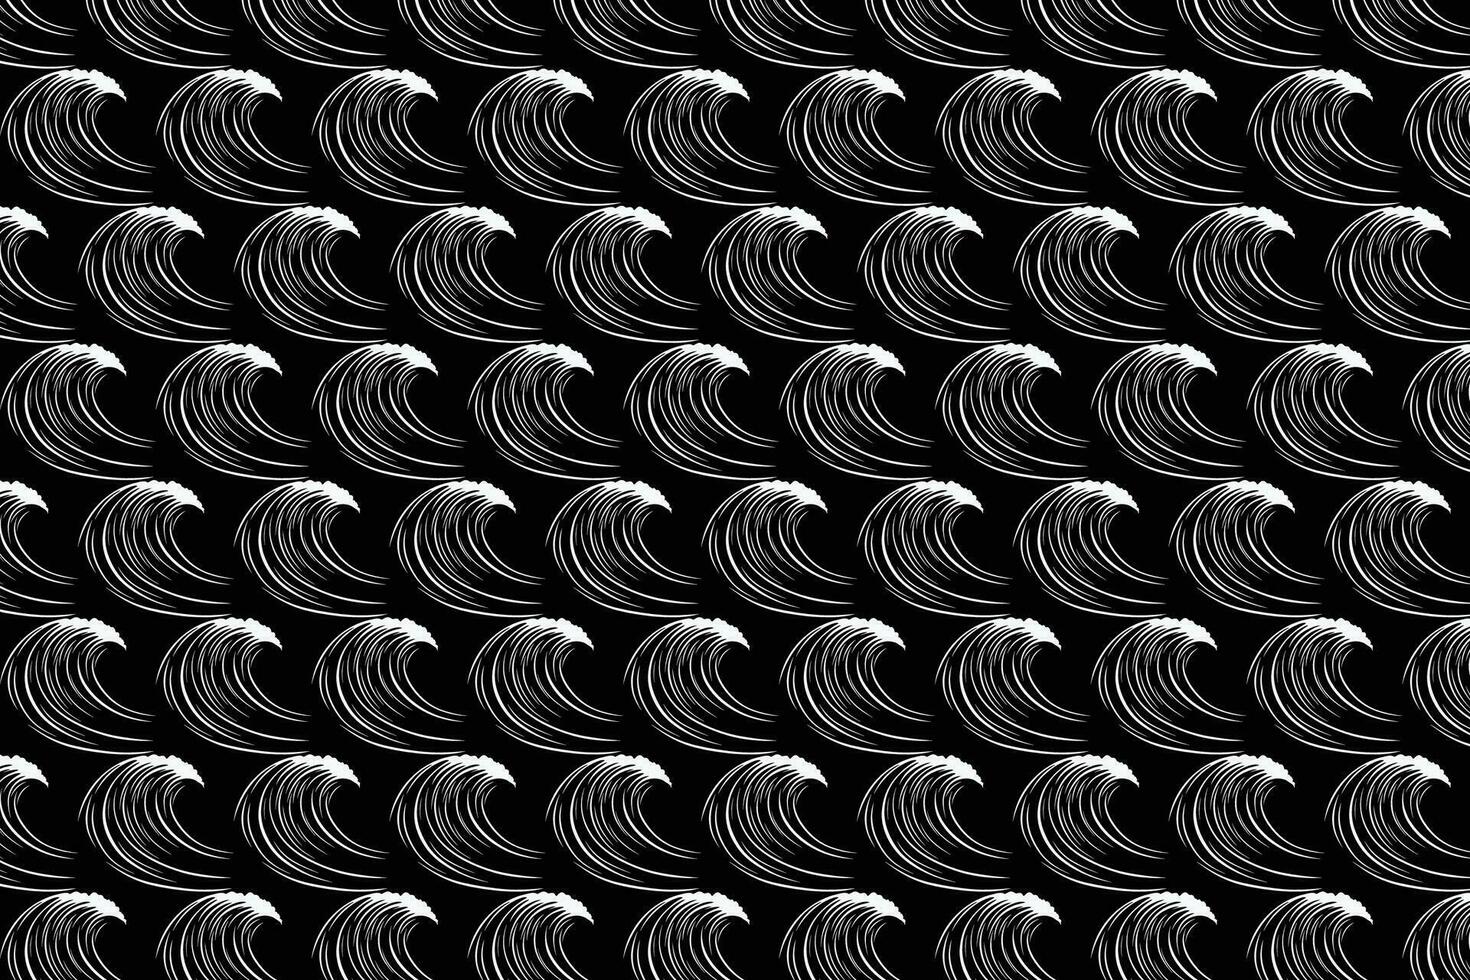 Identical White Waves Arranged in Grid on Black Background vector